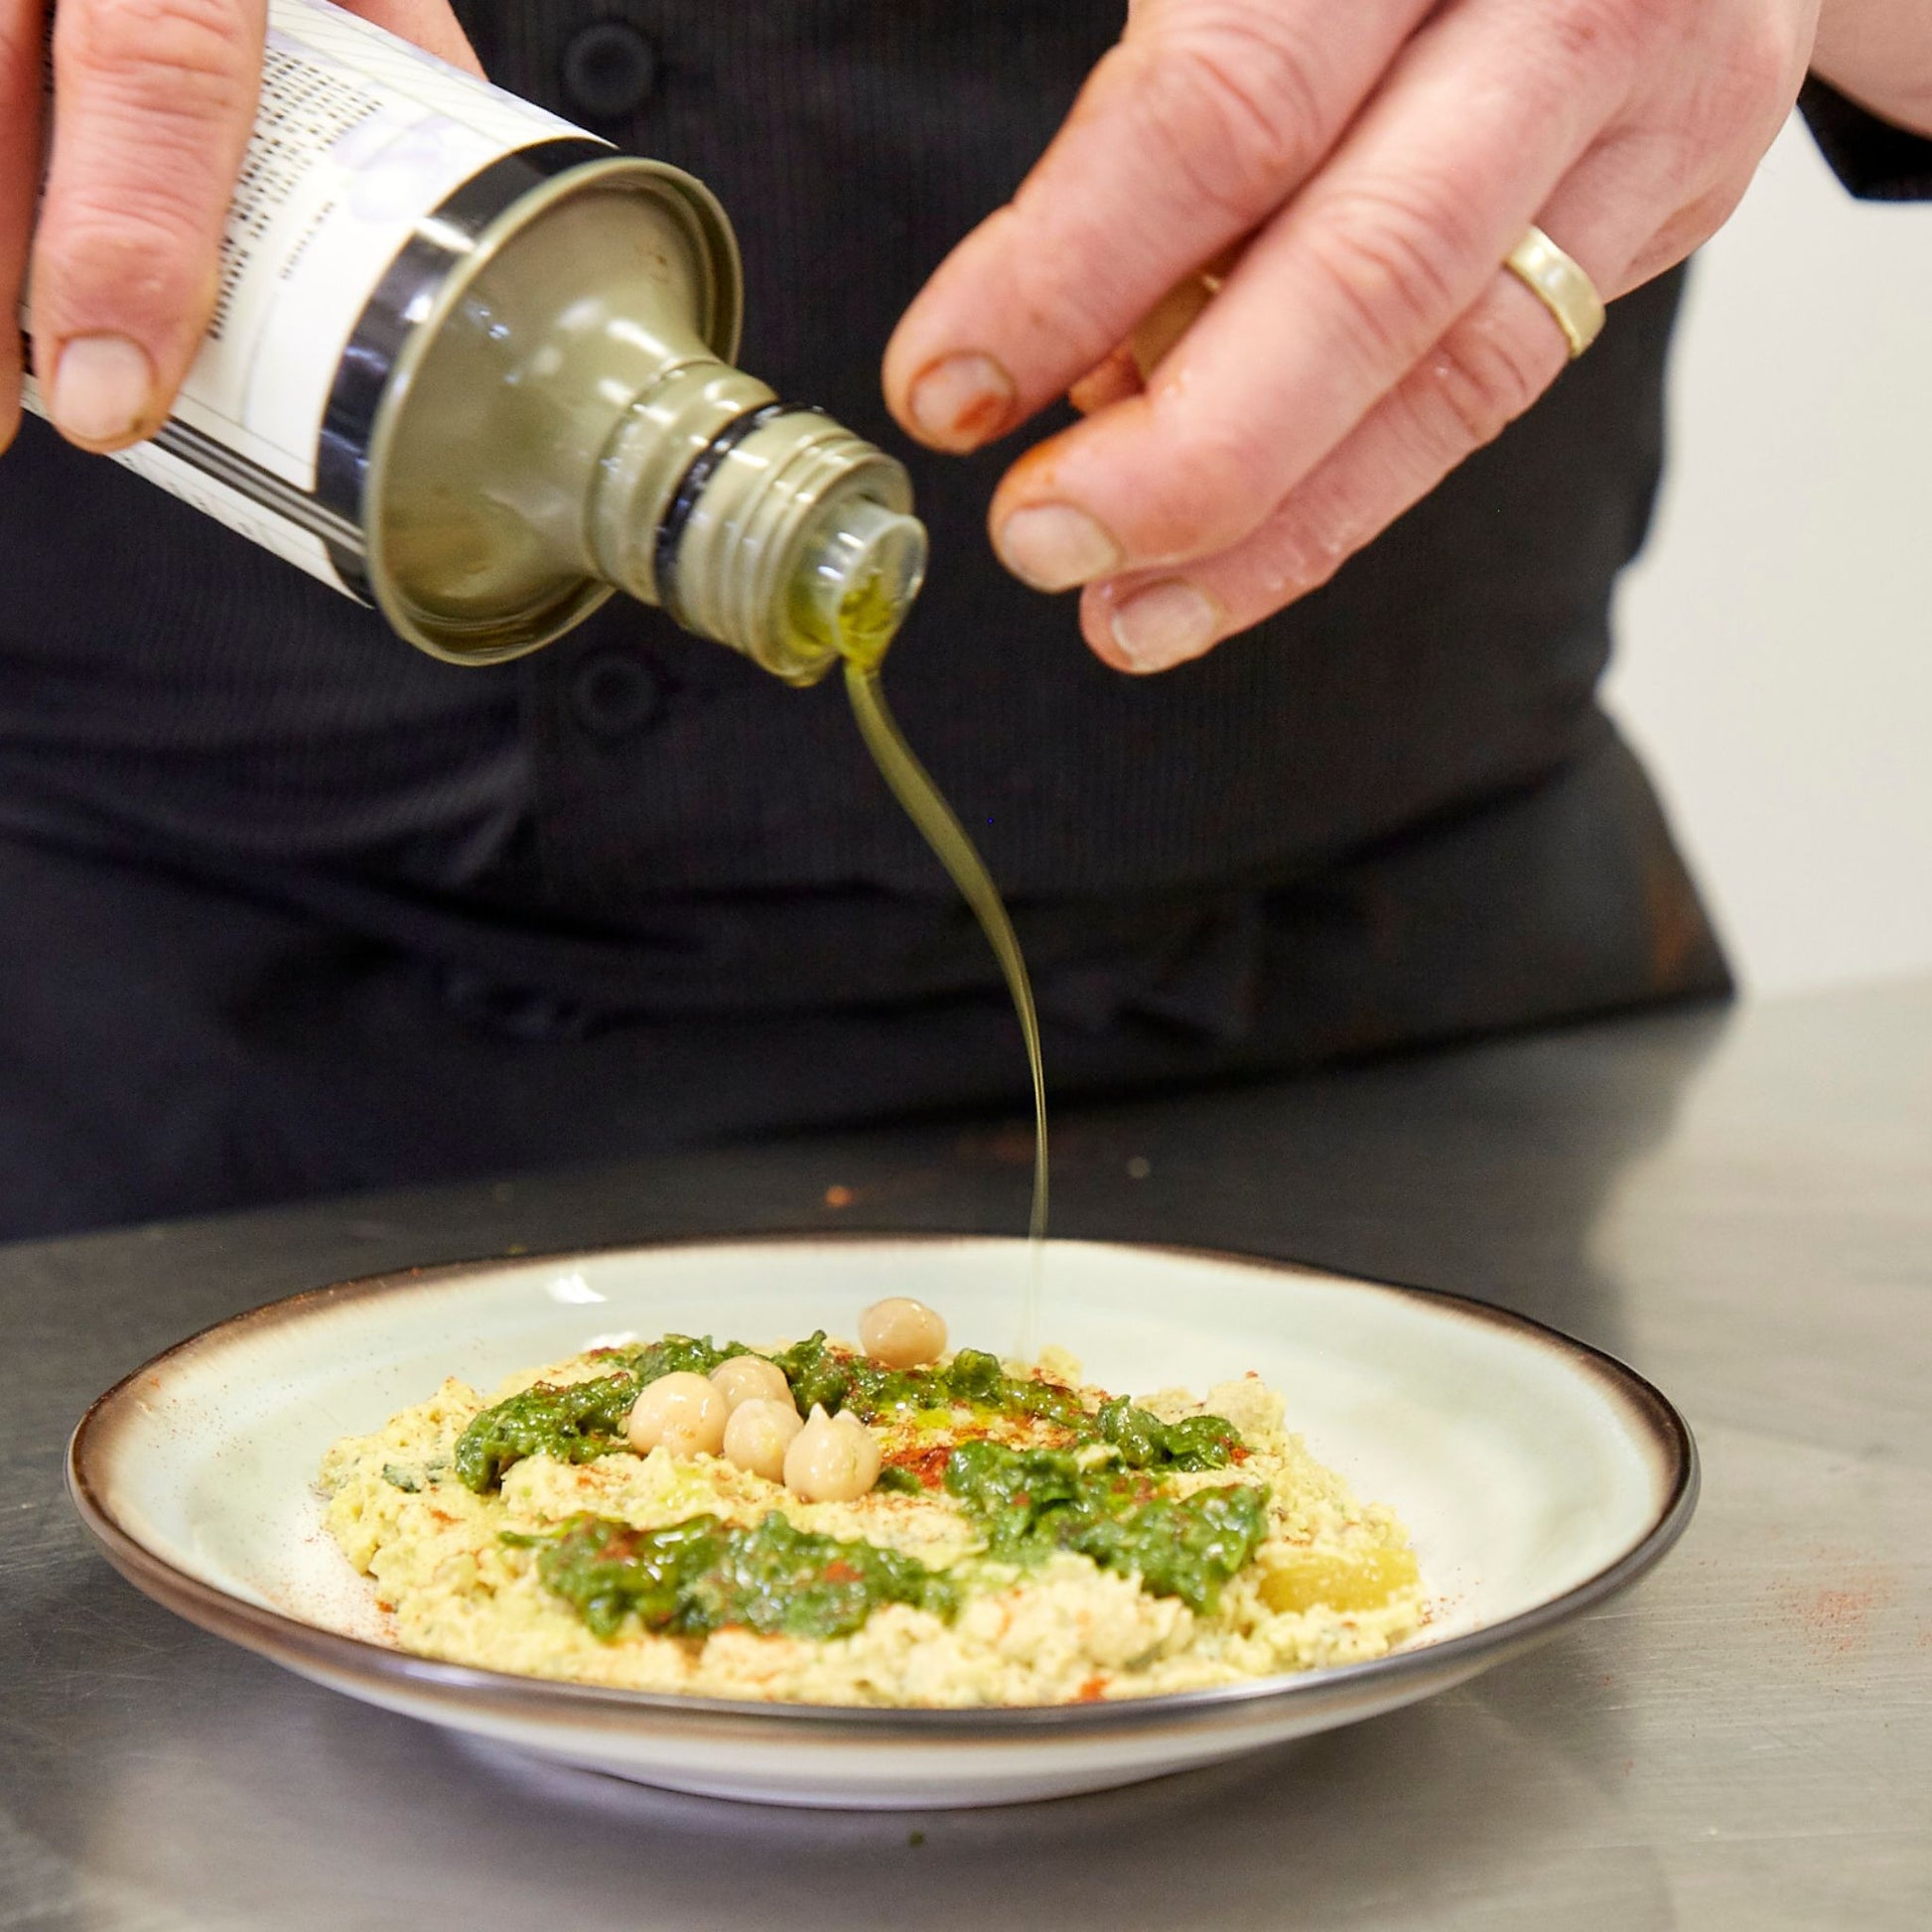 Chef drizzling oil from a bottle onto houmous plate